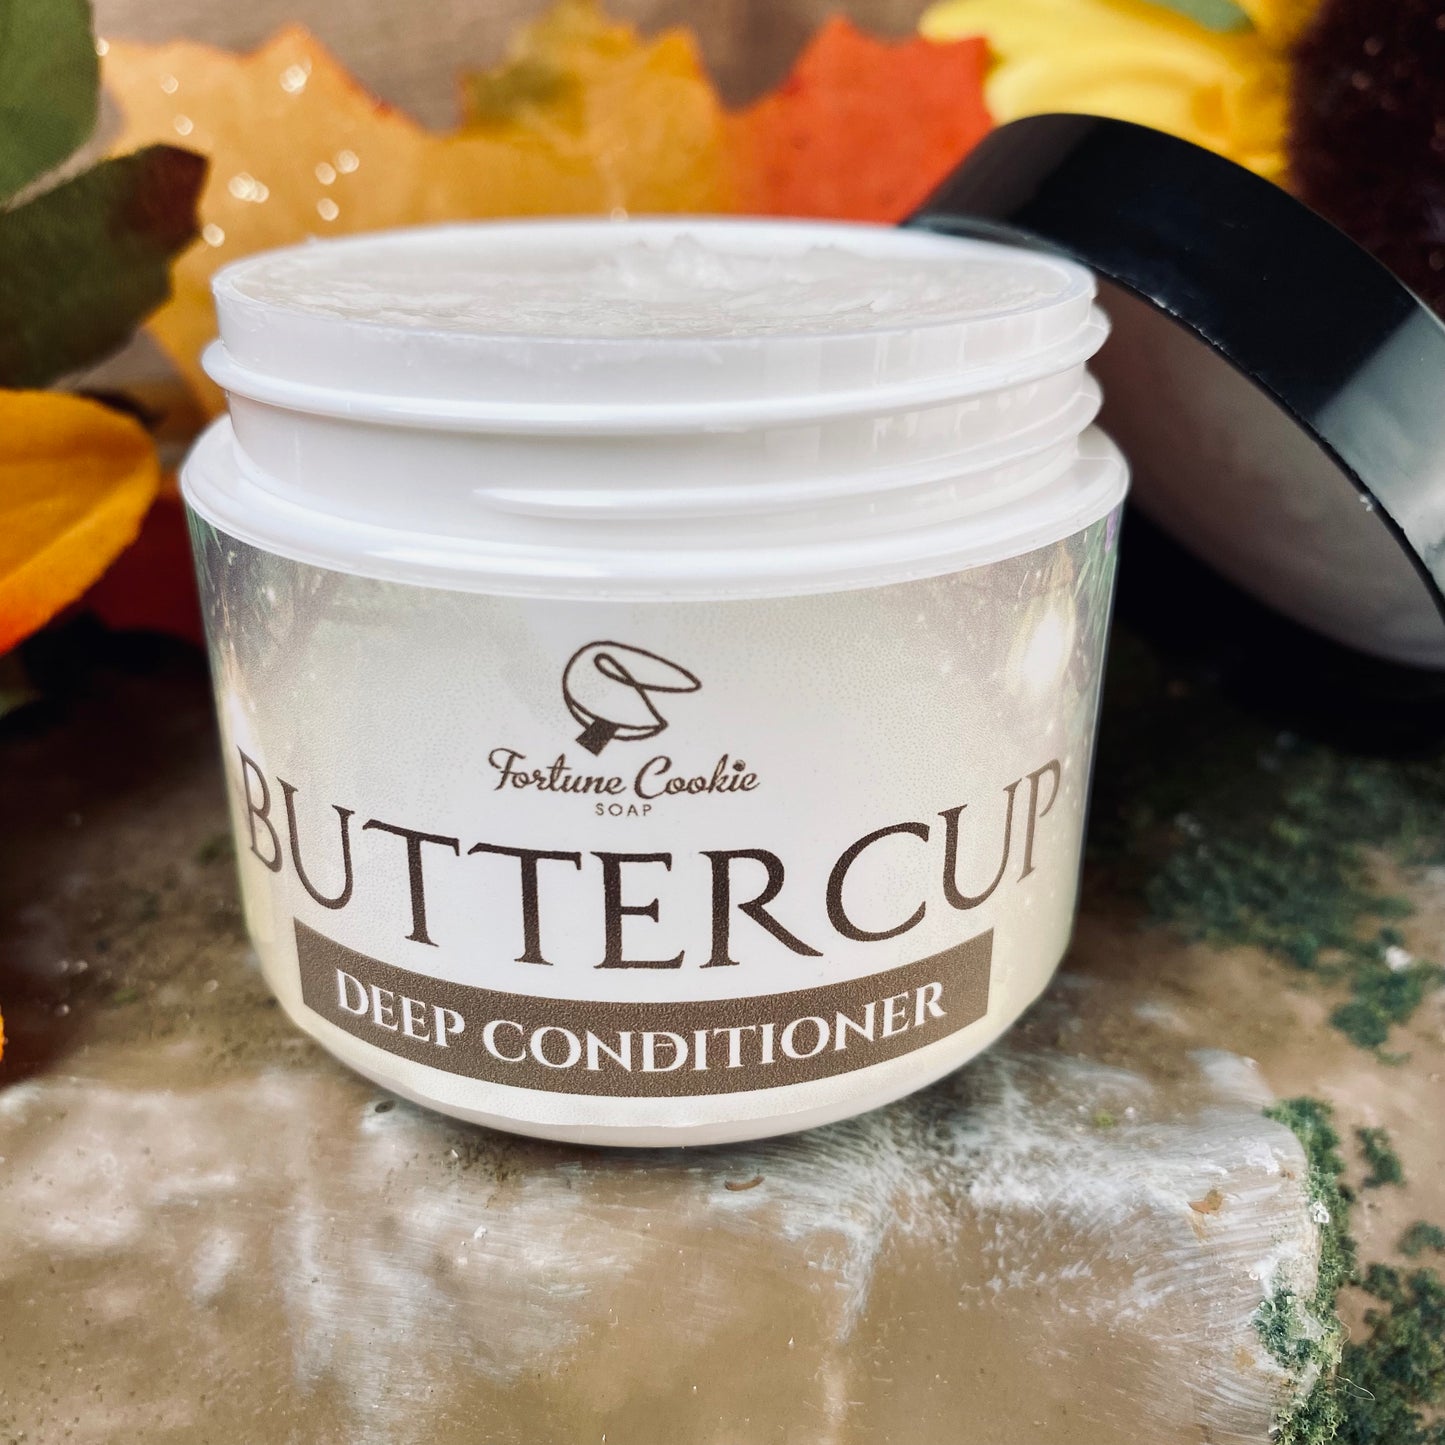 BUTTERCUP Deep Conditioner